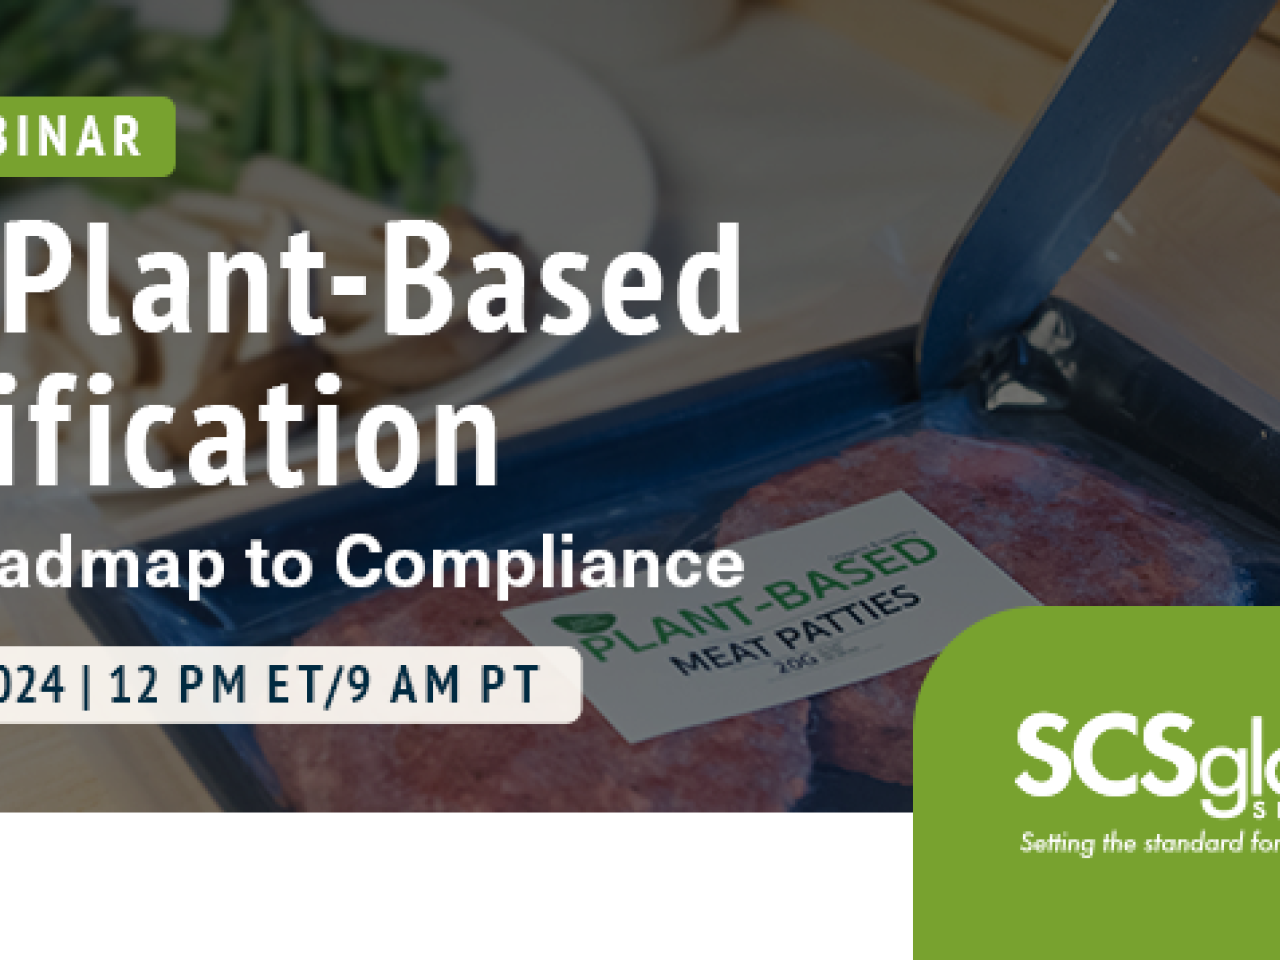 SCS Plant-Based Certification: Your Roadmap to Compliance